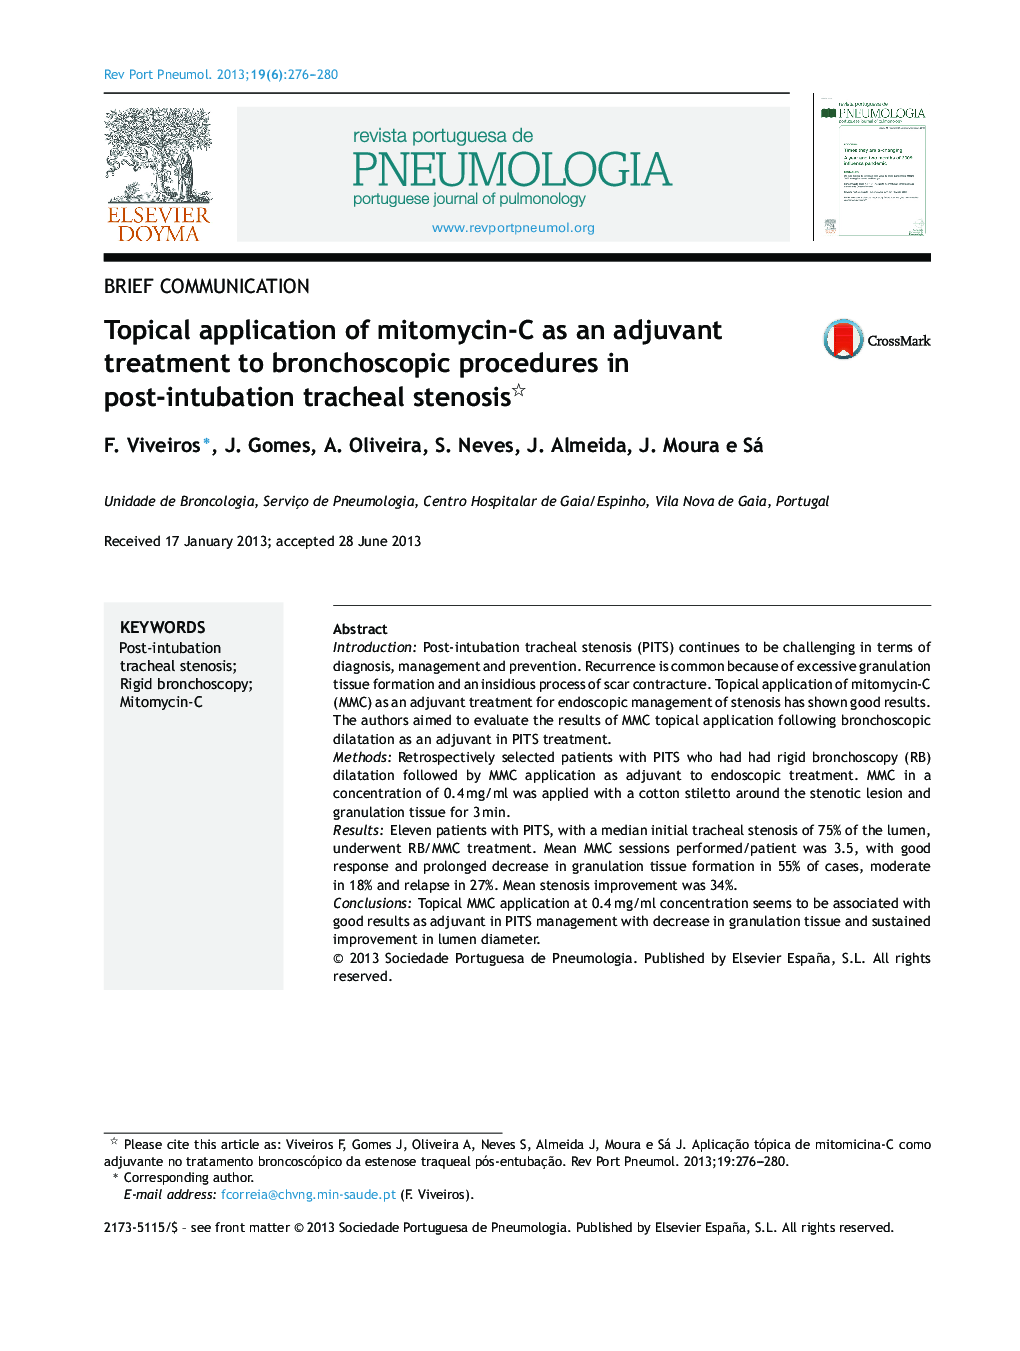 Topical application of mitomycin-C as an adjuvant treatment to bronchoscopic procedures in post-intubation tracheal stenosis